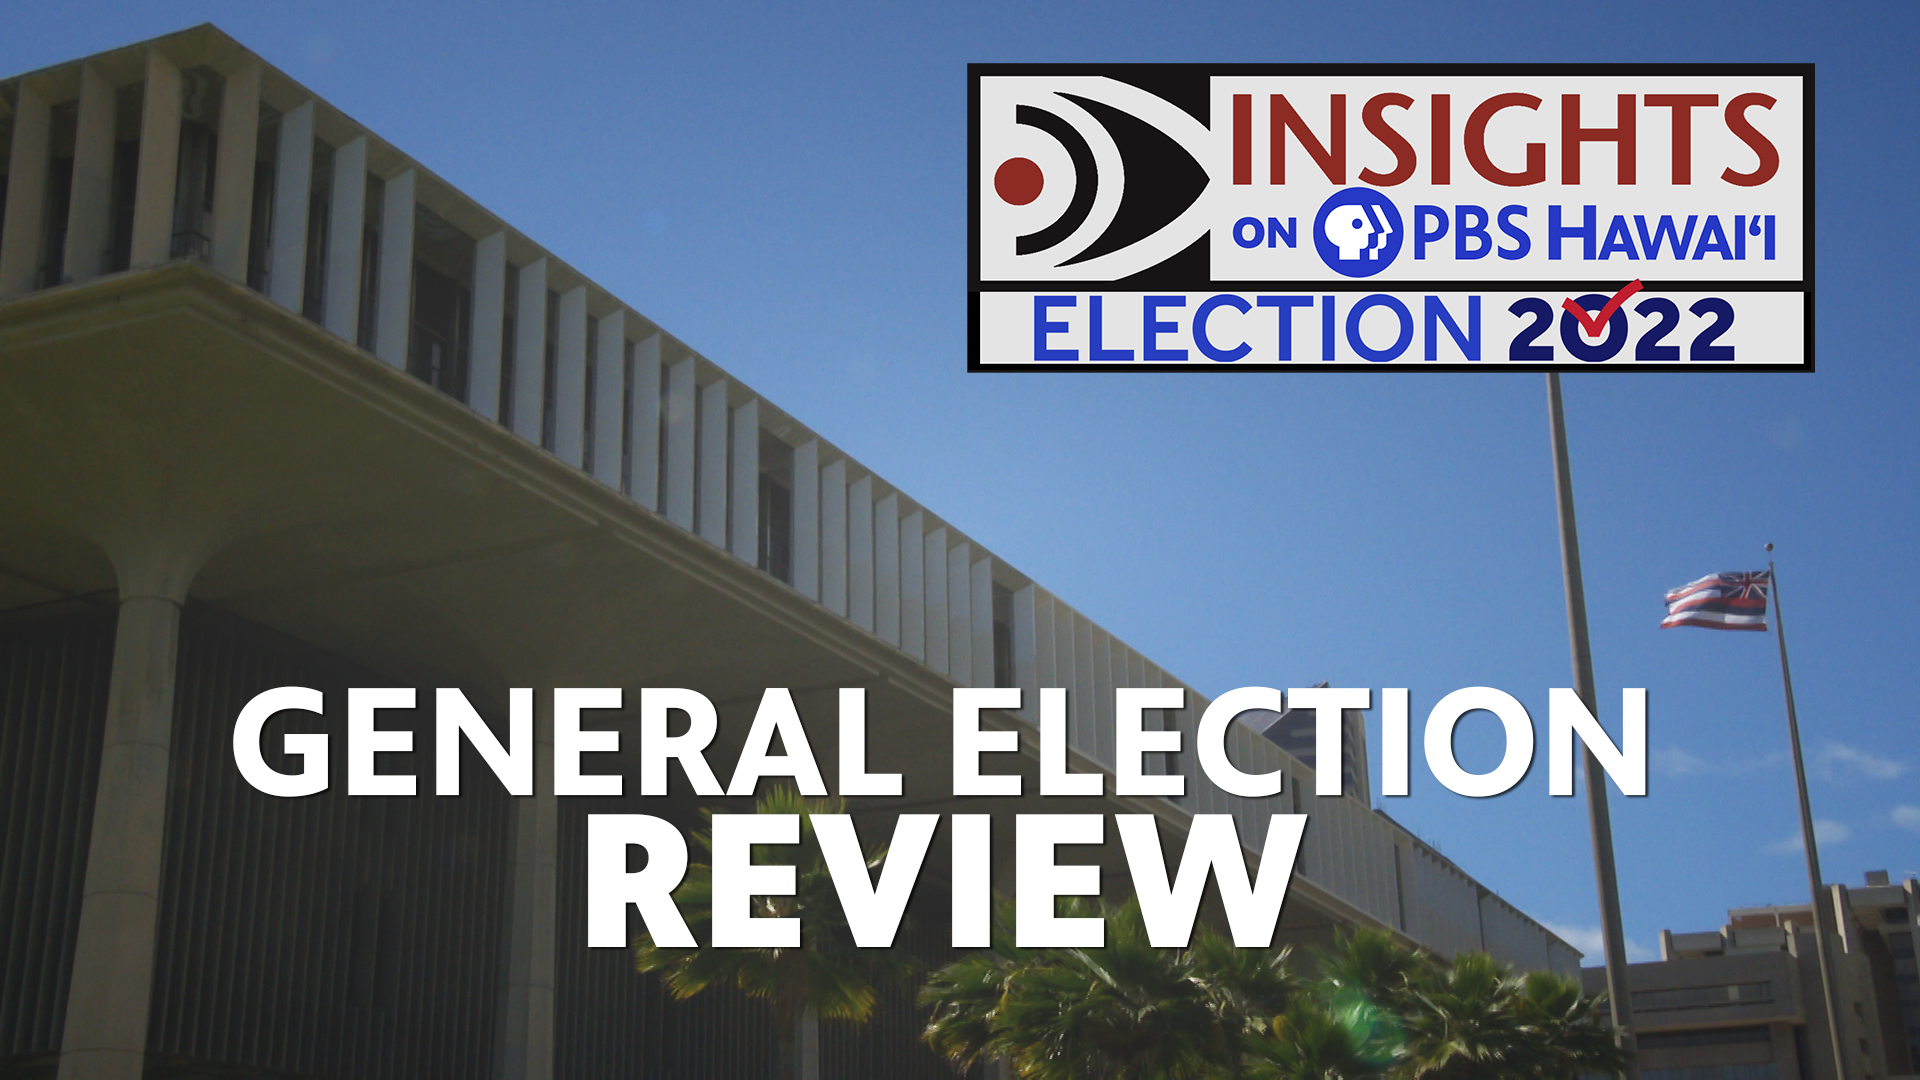 GENERAL ELECTION REVIEW